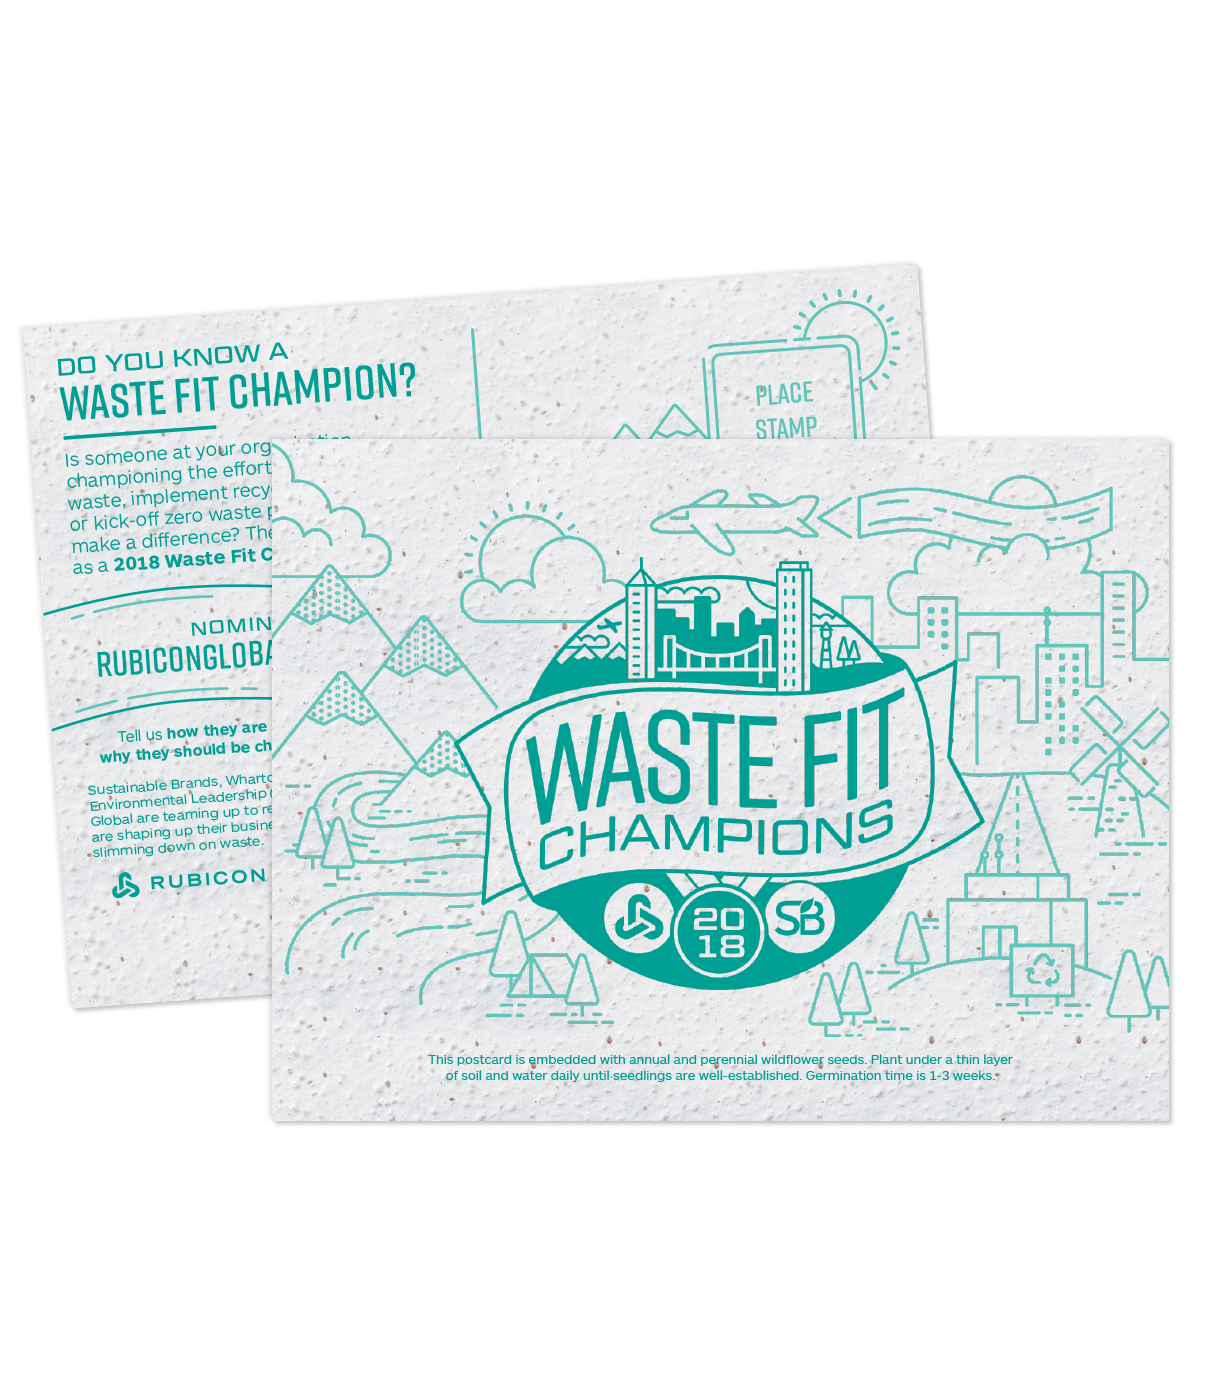 Promotional postcard design for Waste Fit Champions campaign printed on seed paper